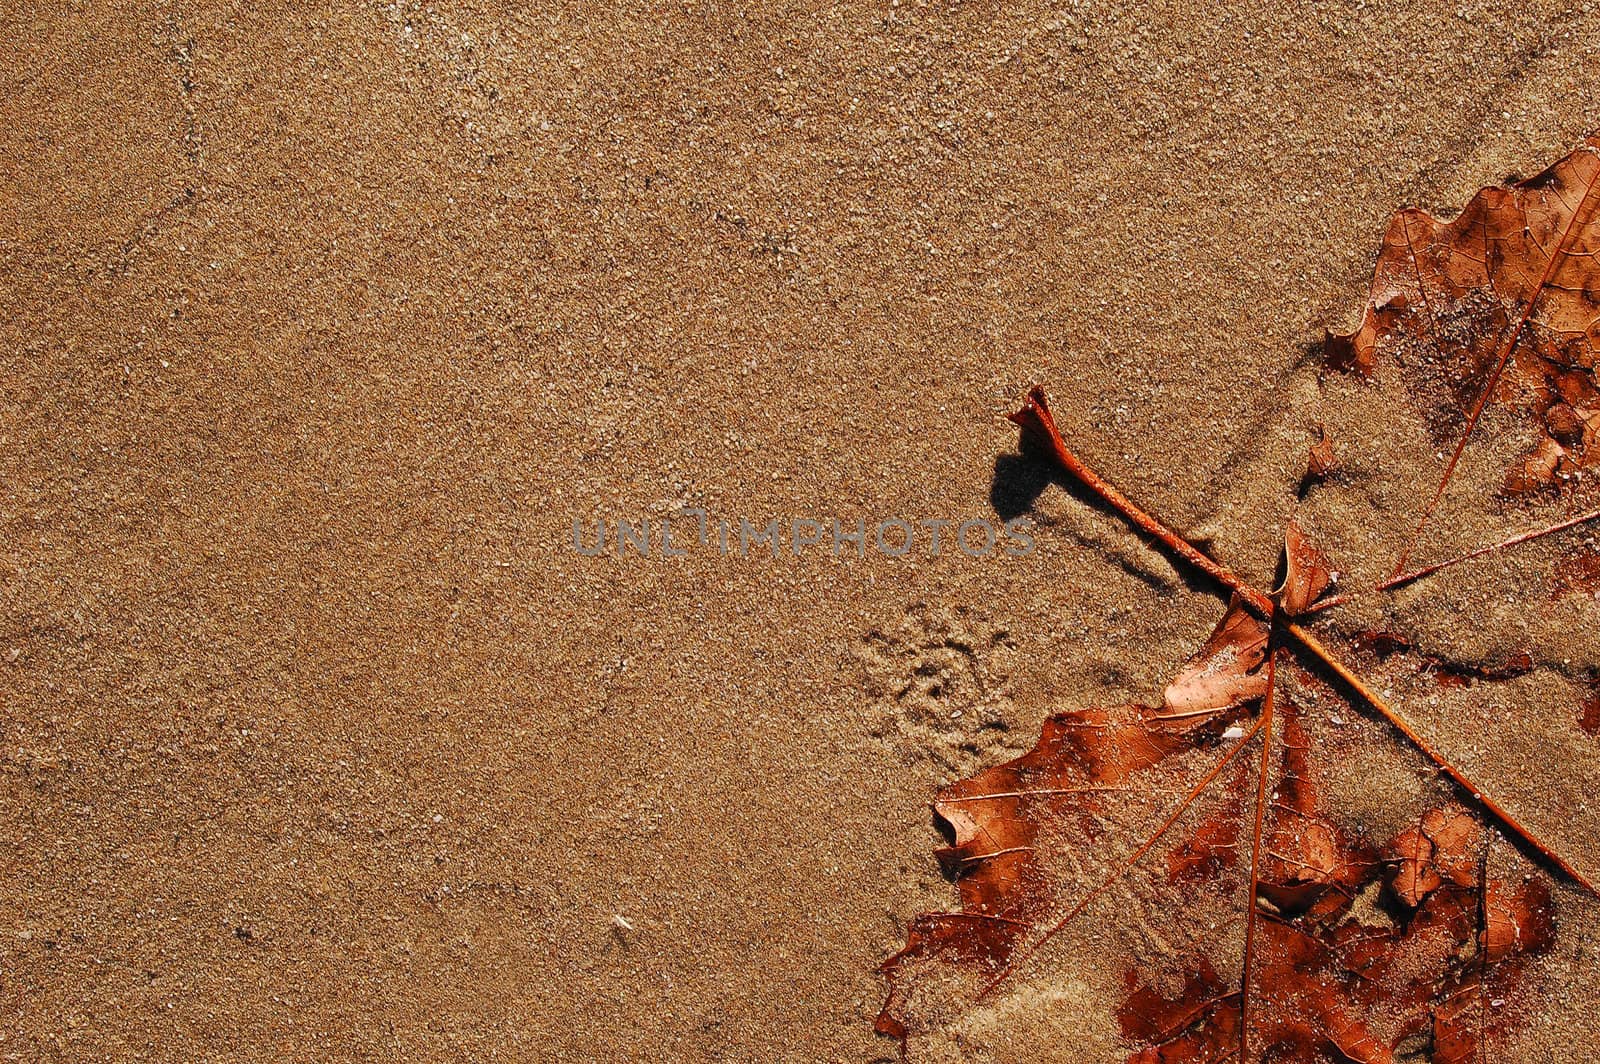 Still life leave and sand